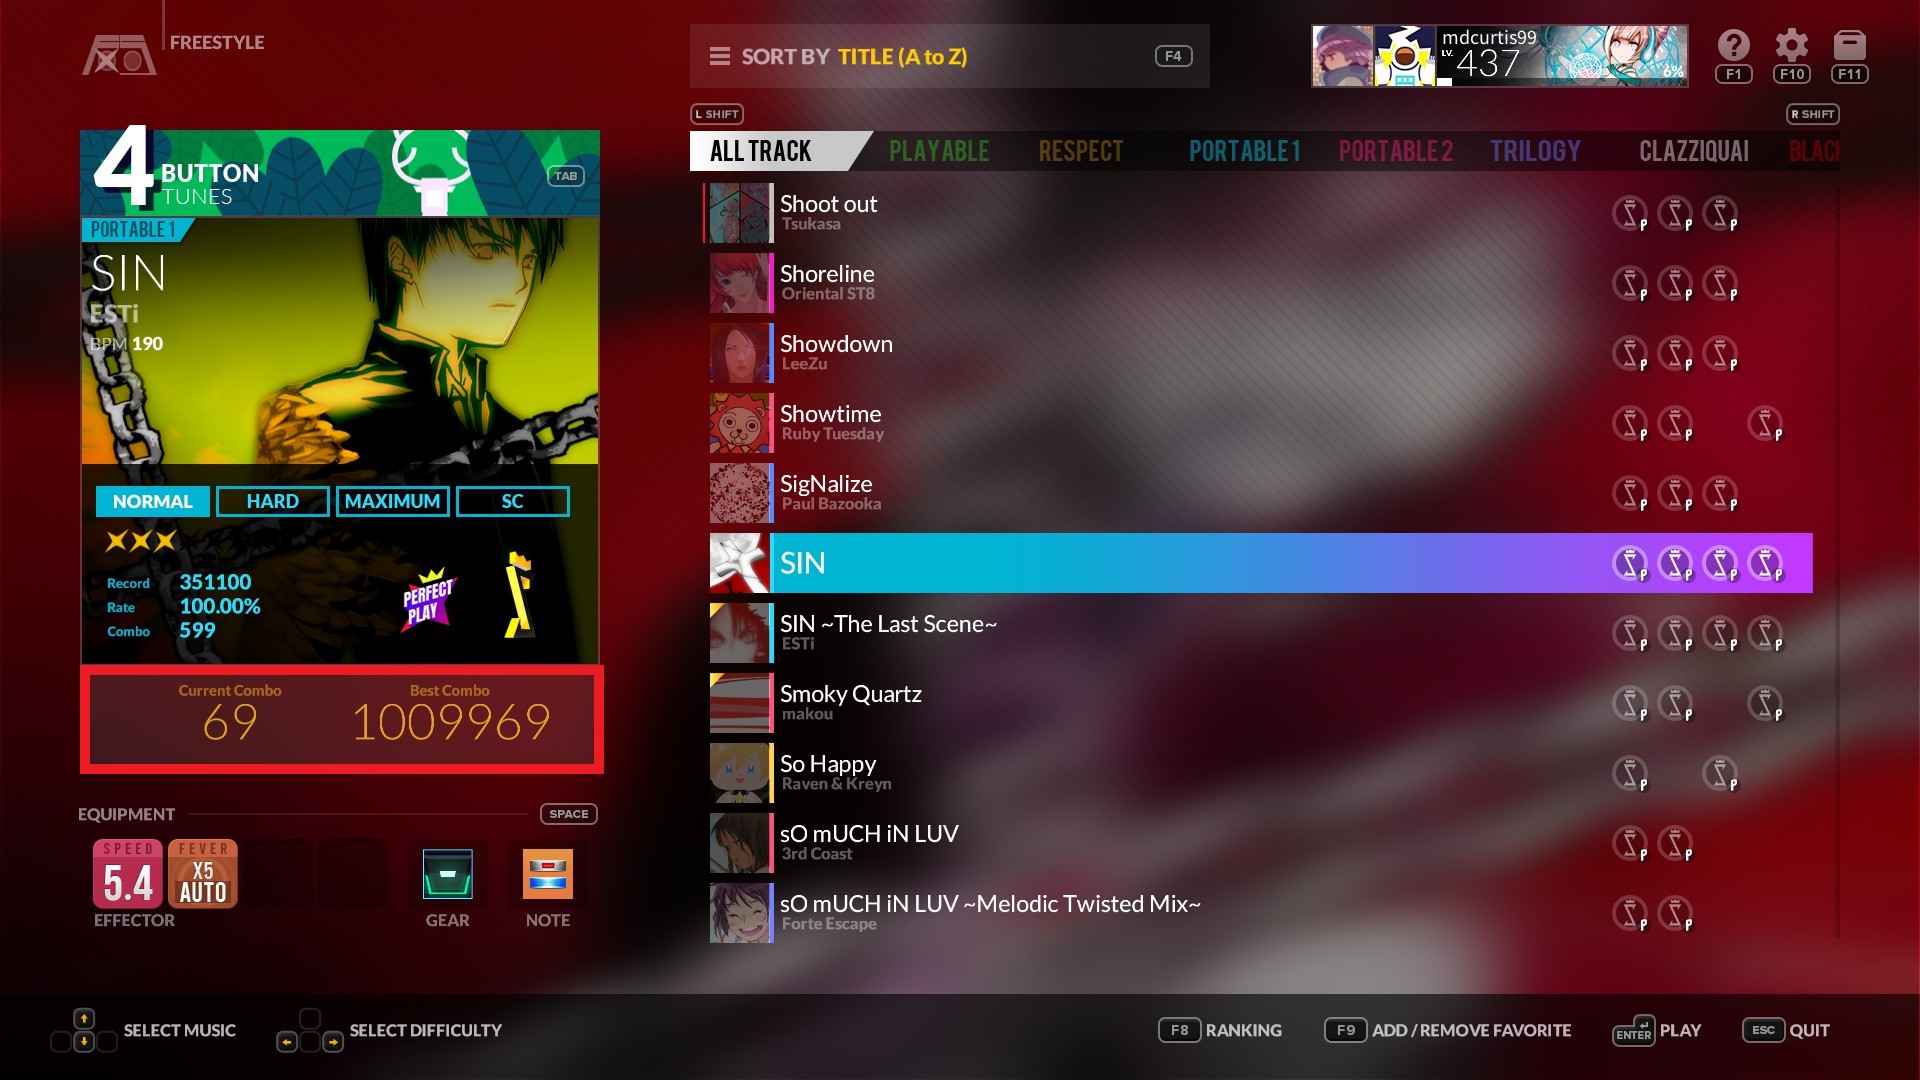 DJMAX RESPECT V - Full Walkthough + All Achievements Guide Complete - Base Game Achievements - Free Style - 6F48258